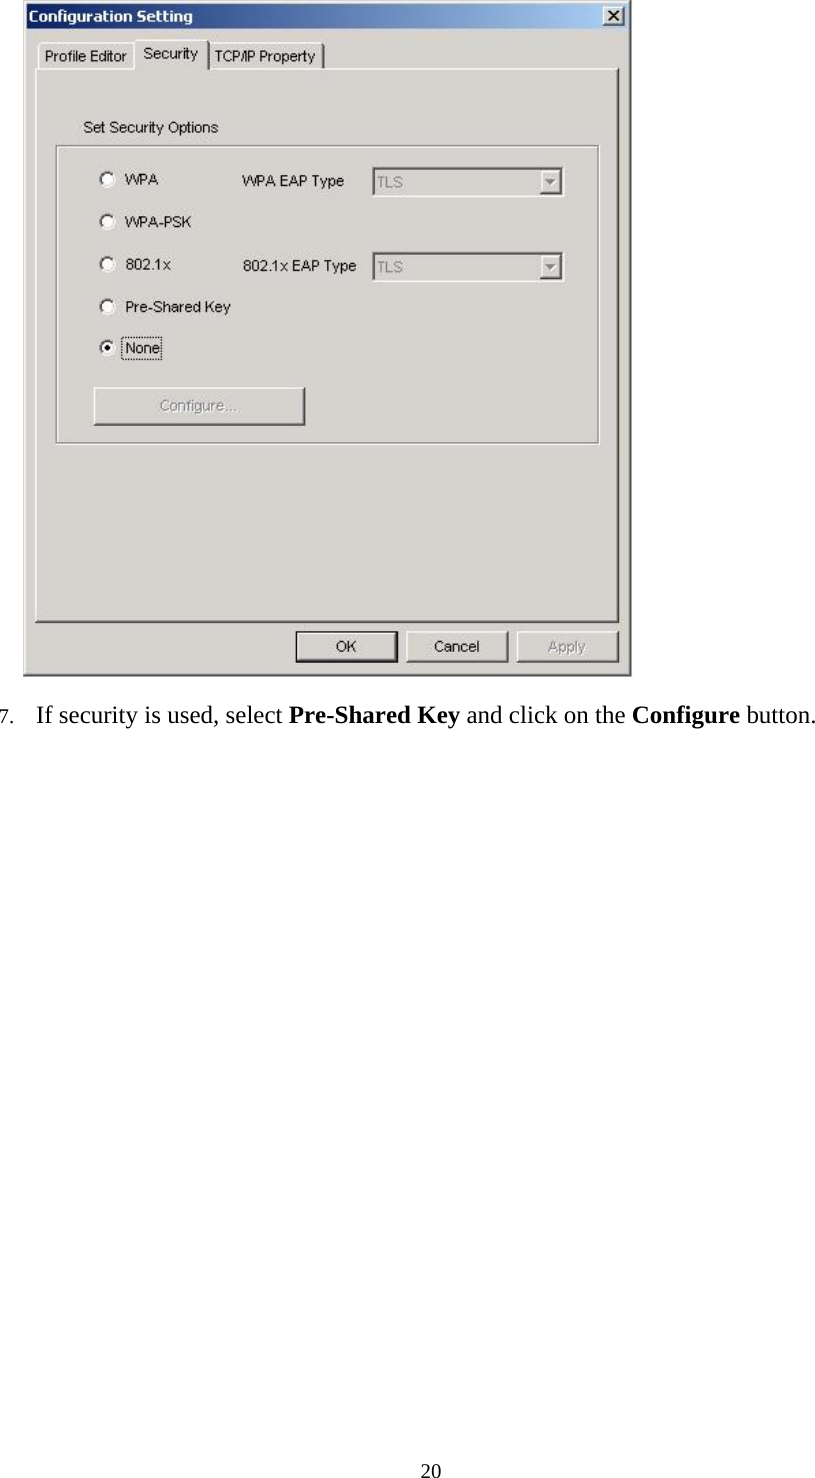  20    7. If security is used, select Pre-Shared Key and click on the Configure button.  